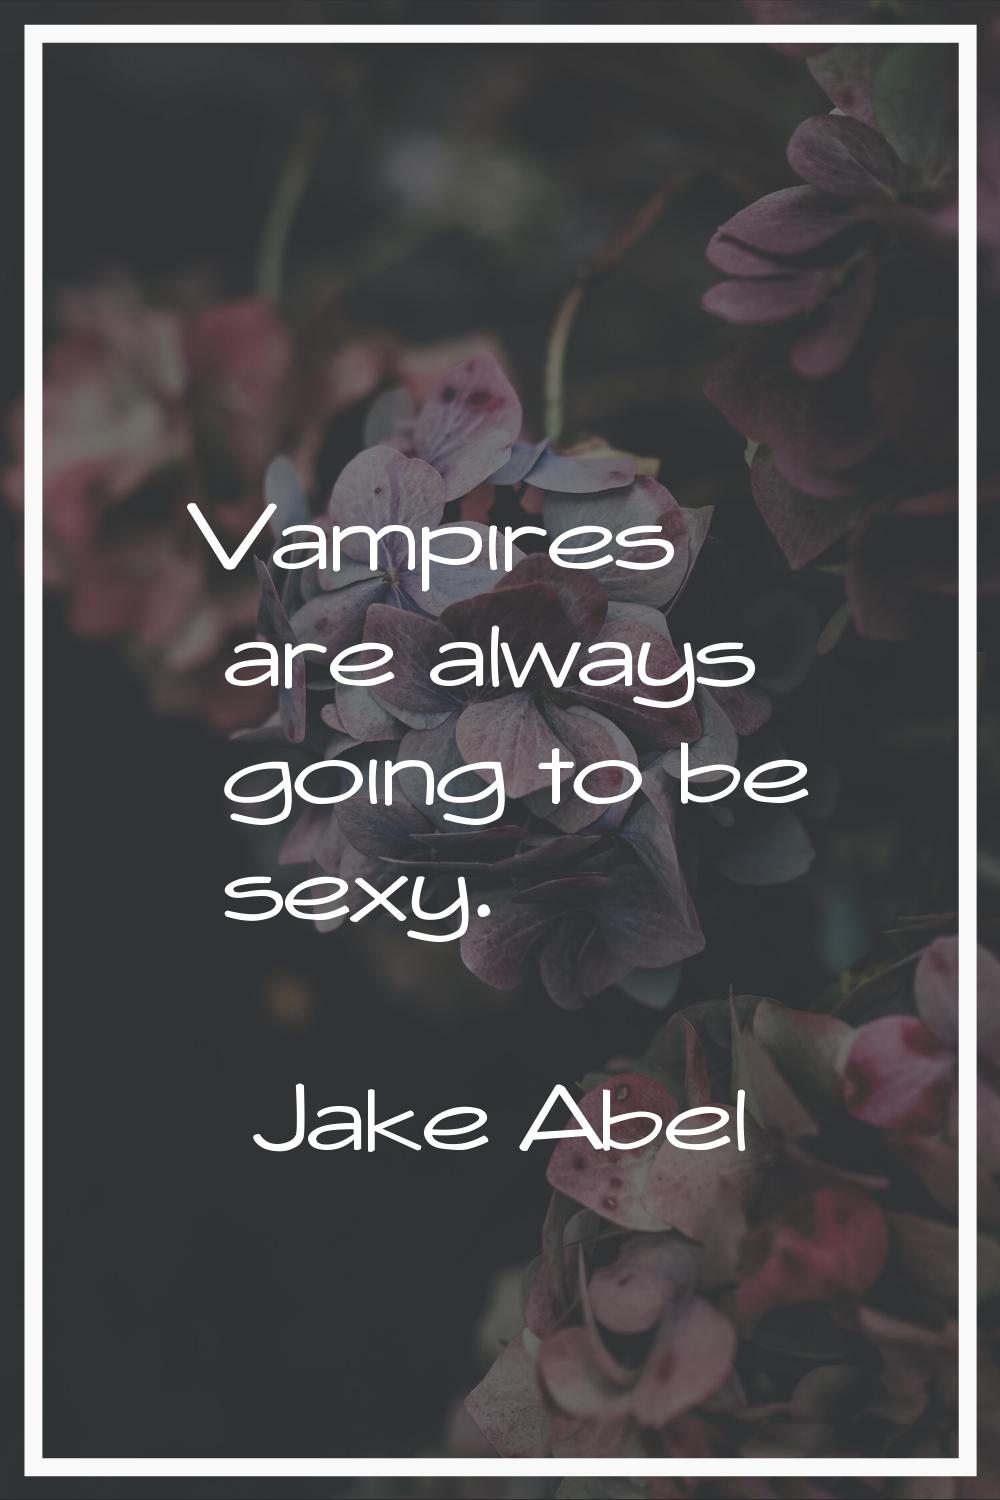 Vampires are always going to be sexy.